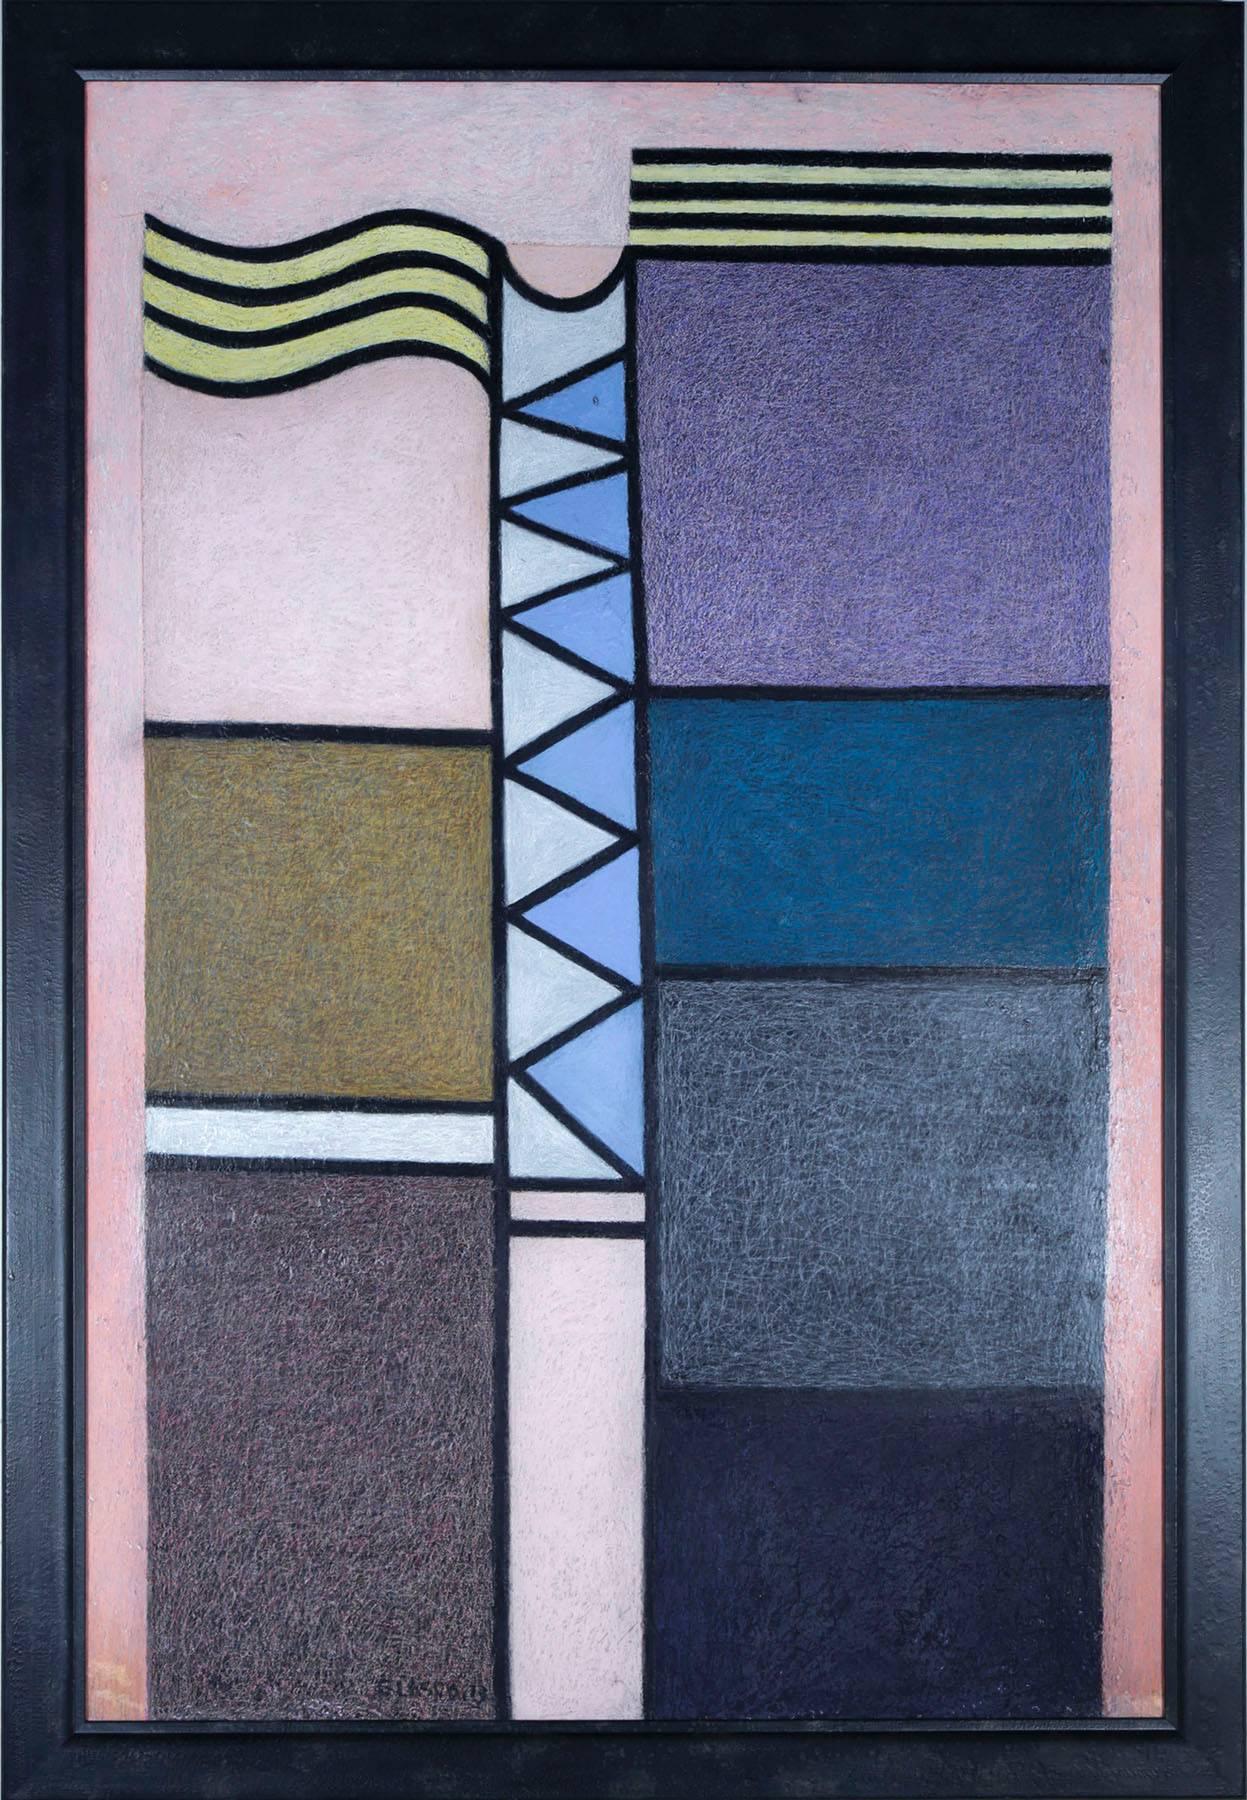 pastel on cardboard with glazes
signed and dated '73 lower left
59.5 in h. x 39.5 in. w.
framed

Exhibited: Joseph Glasco 1948-1986  A Sesquicentennial Exhibition, April-June 1986, Houston, Contemporary Arts Museum

Provenance:  The David